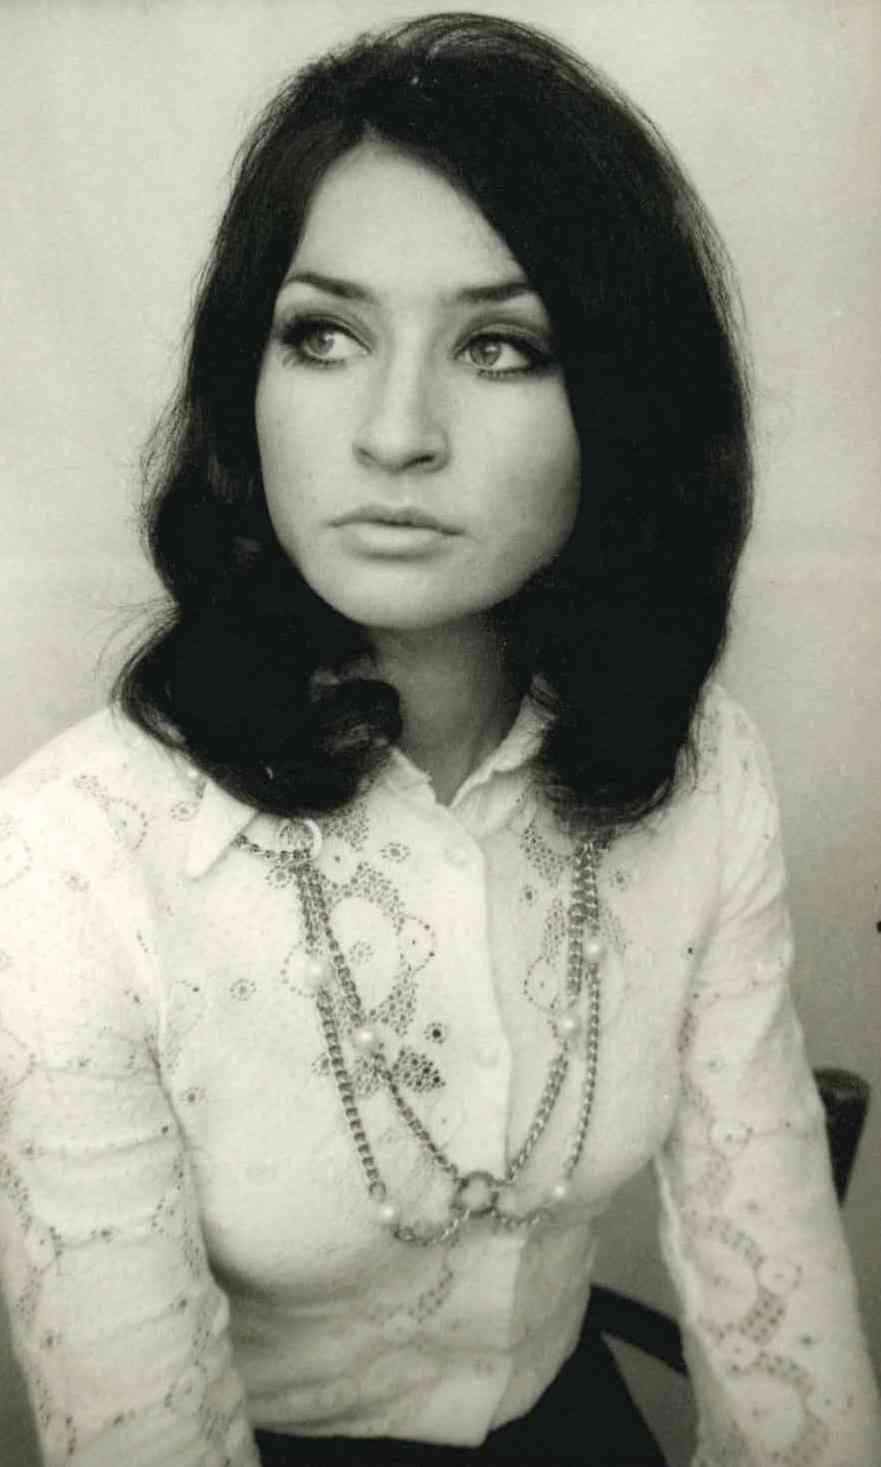 White Lace Blouse Seated.jpg